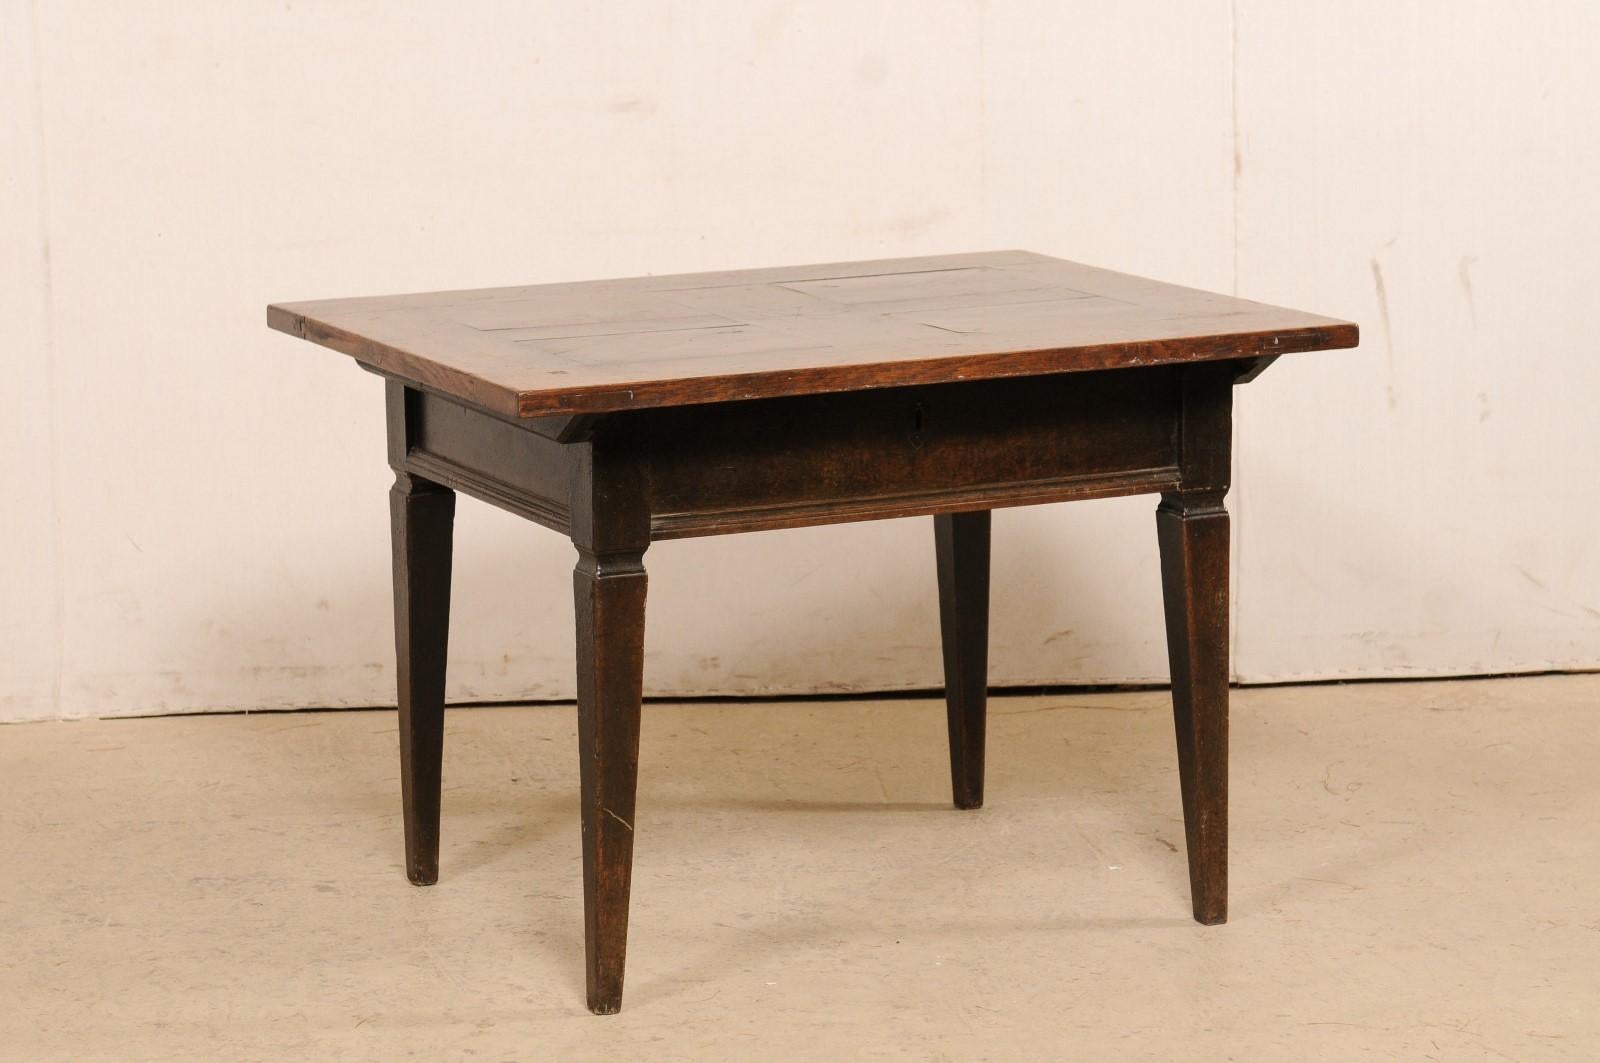 A French occasional table with star accent from the 18th century. The antique oak table from France features a rectangular shaped top, with a decorative star medallion inlay at it's center, which overhangs the apron below, with straight molding